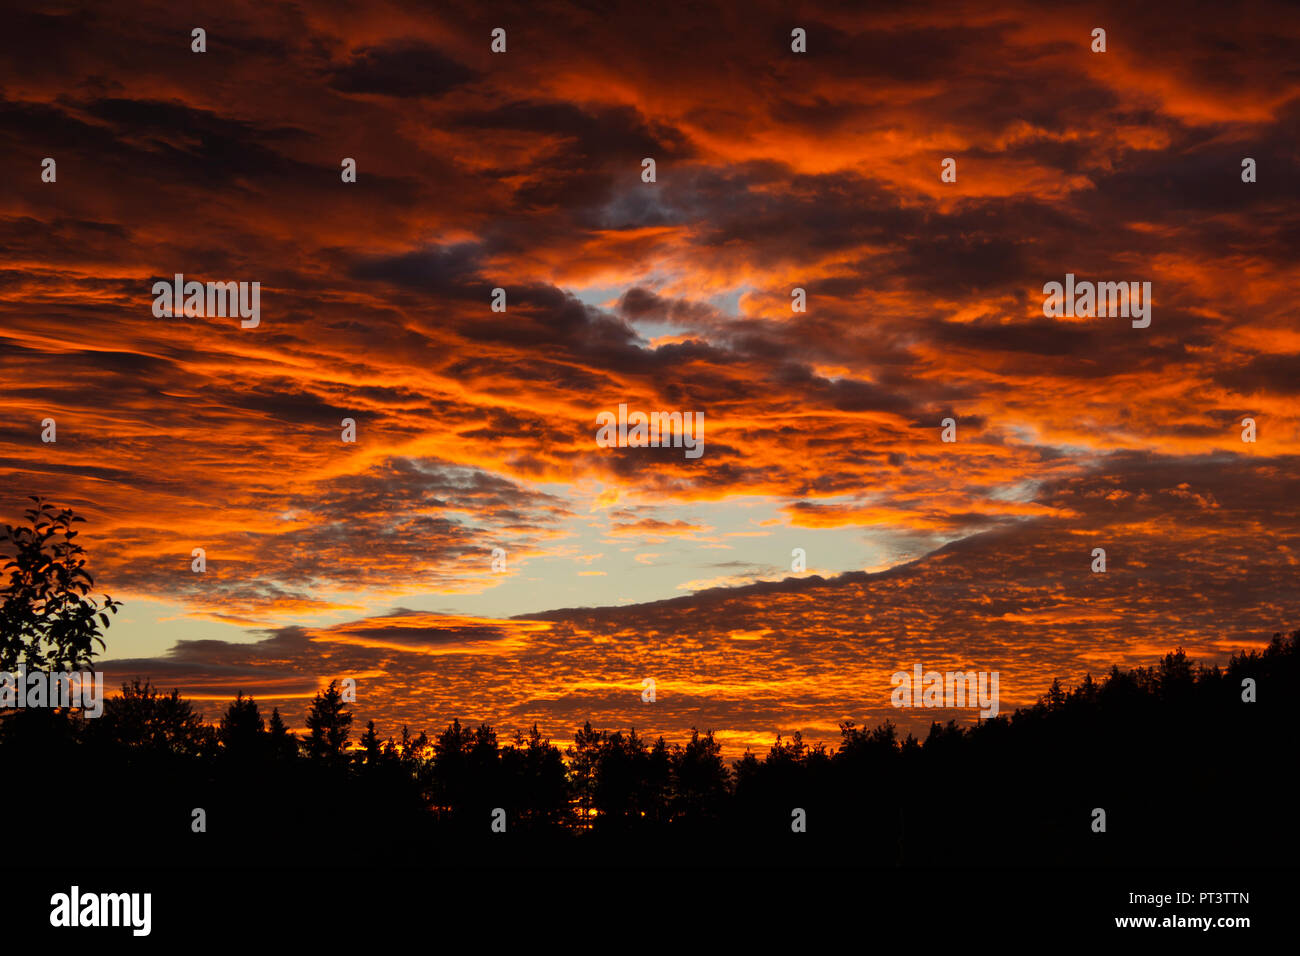 Clouds lit orange with a fallstreak hole in the middle. Silhouette of trees below. Stock Photo